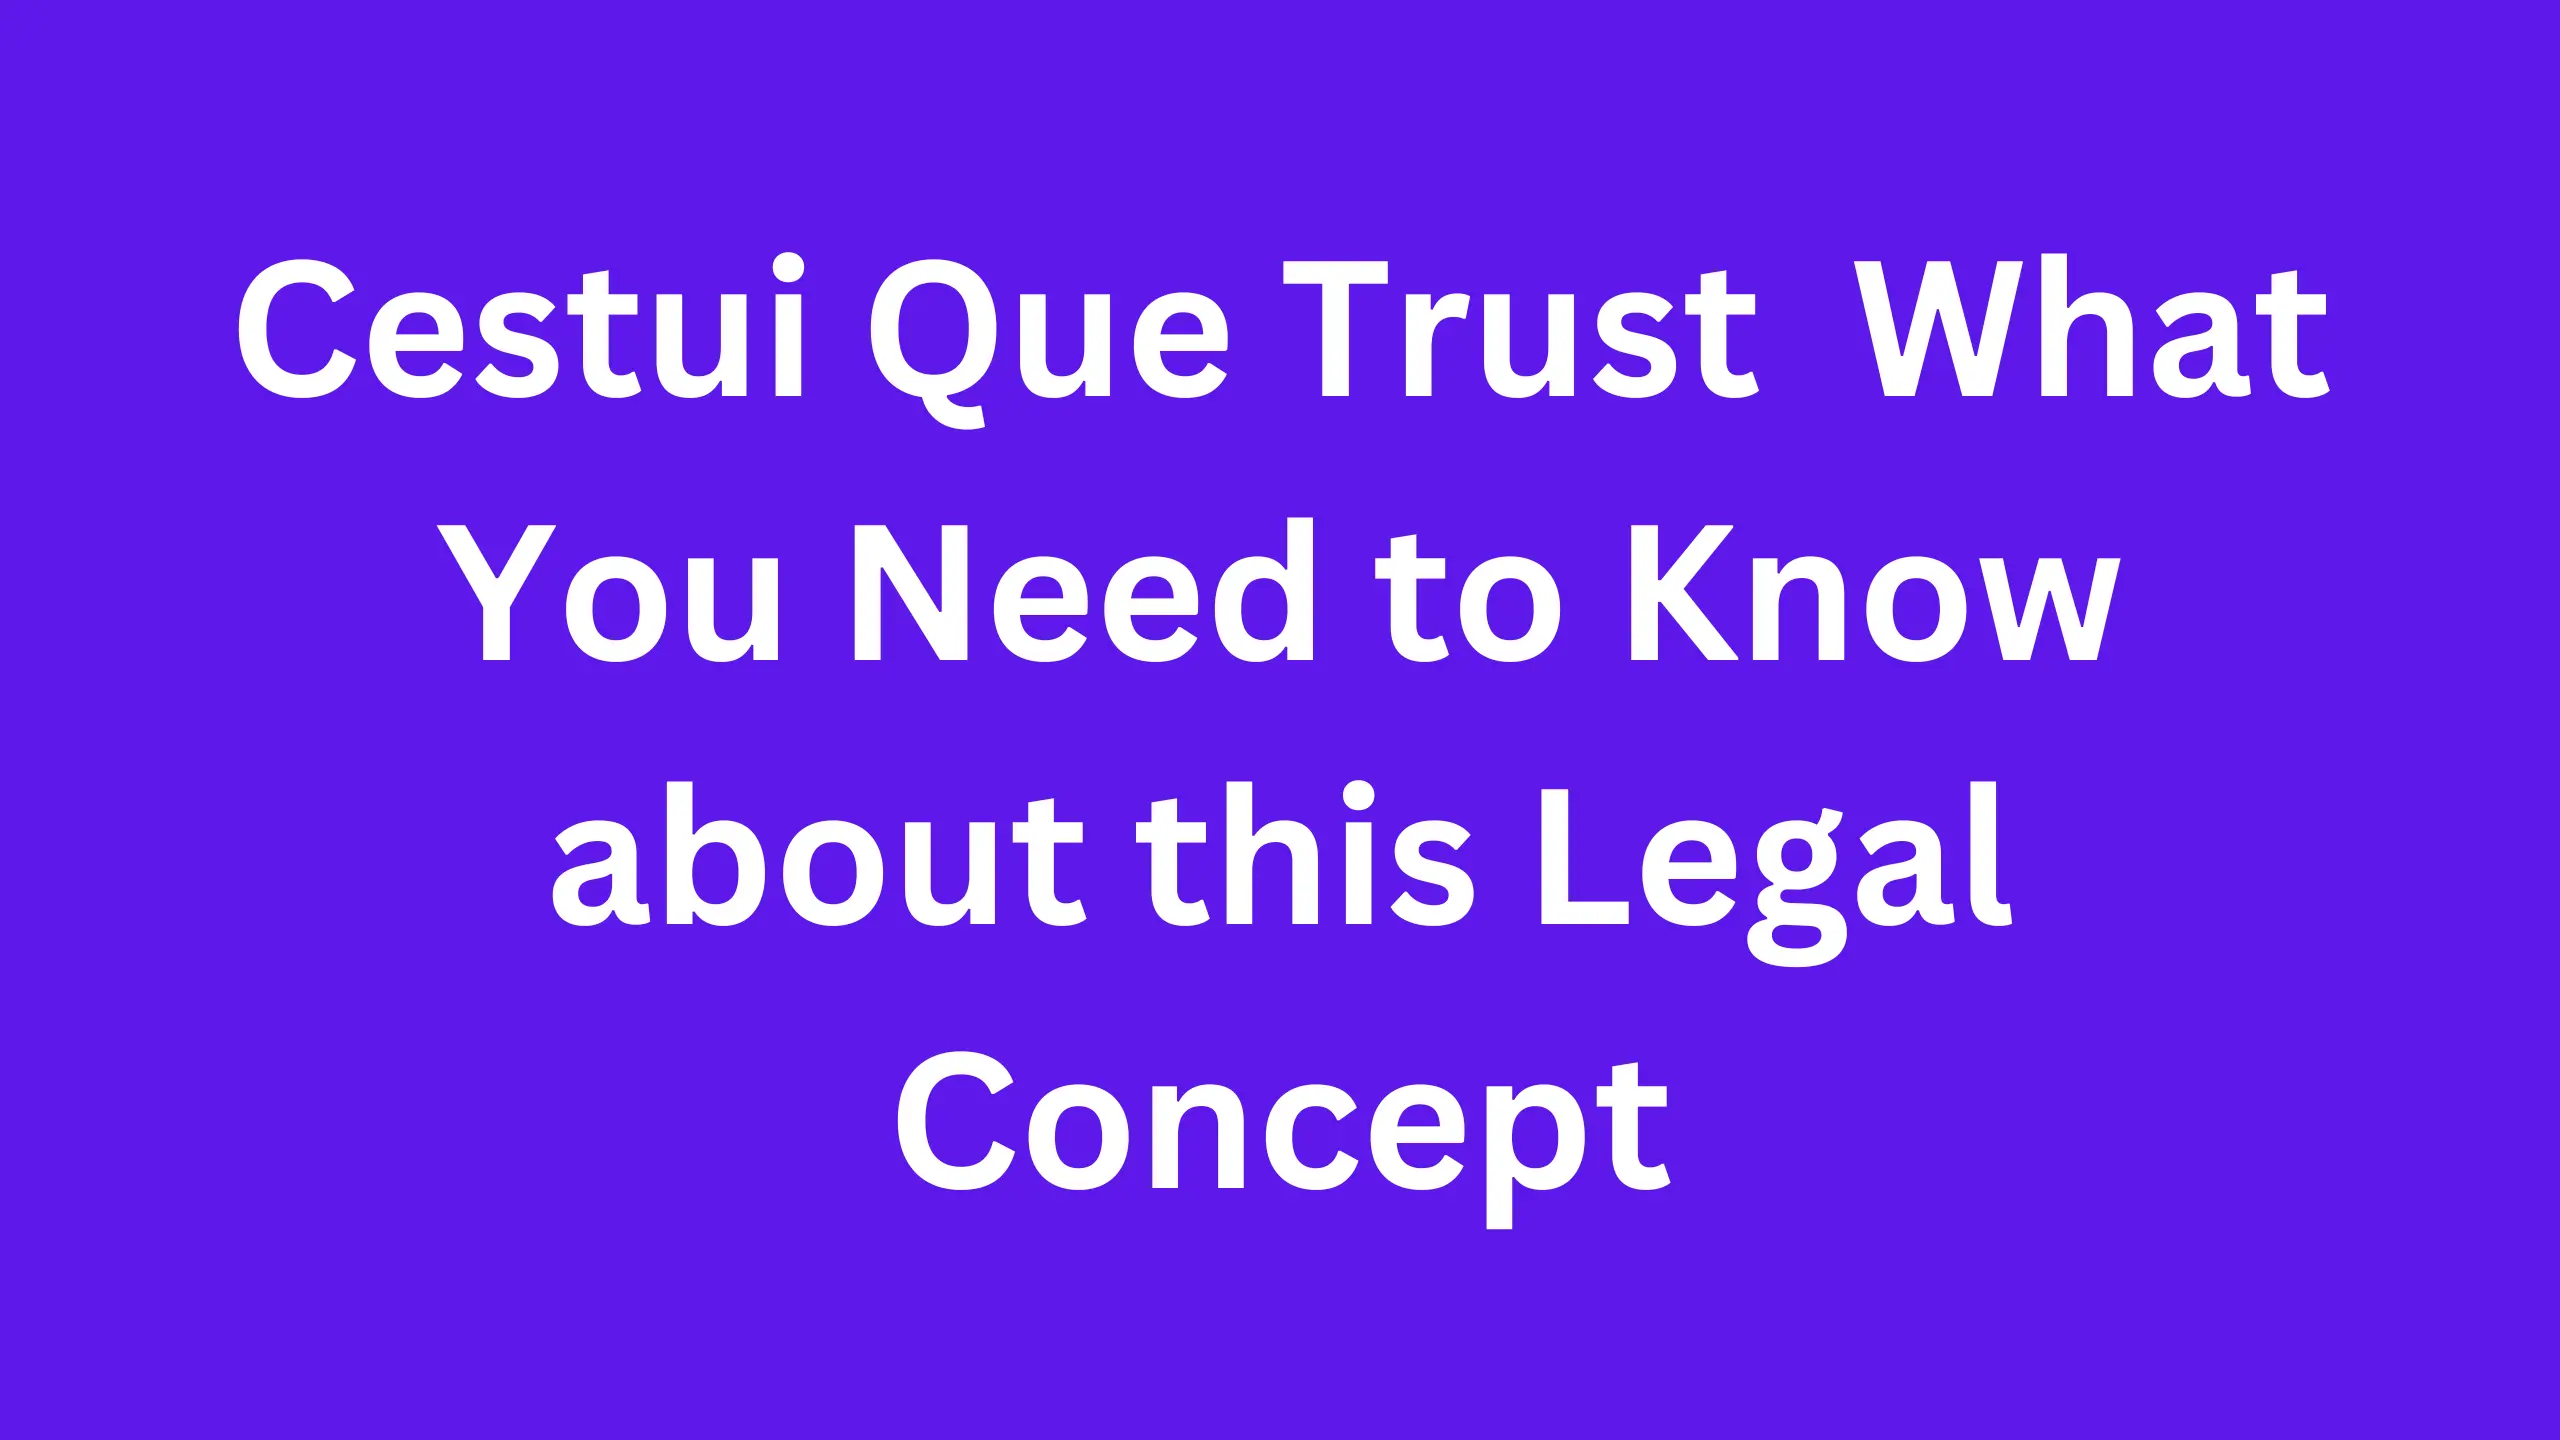 Cestui Que Trust   What You Need to Know about this Legal Concept